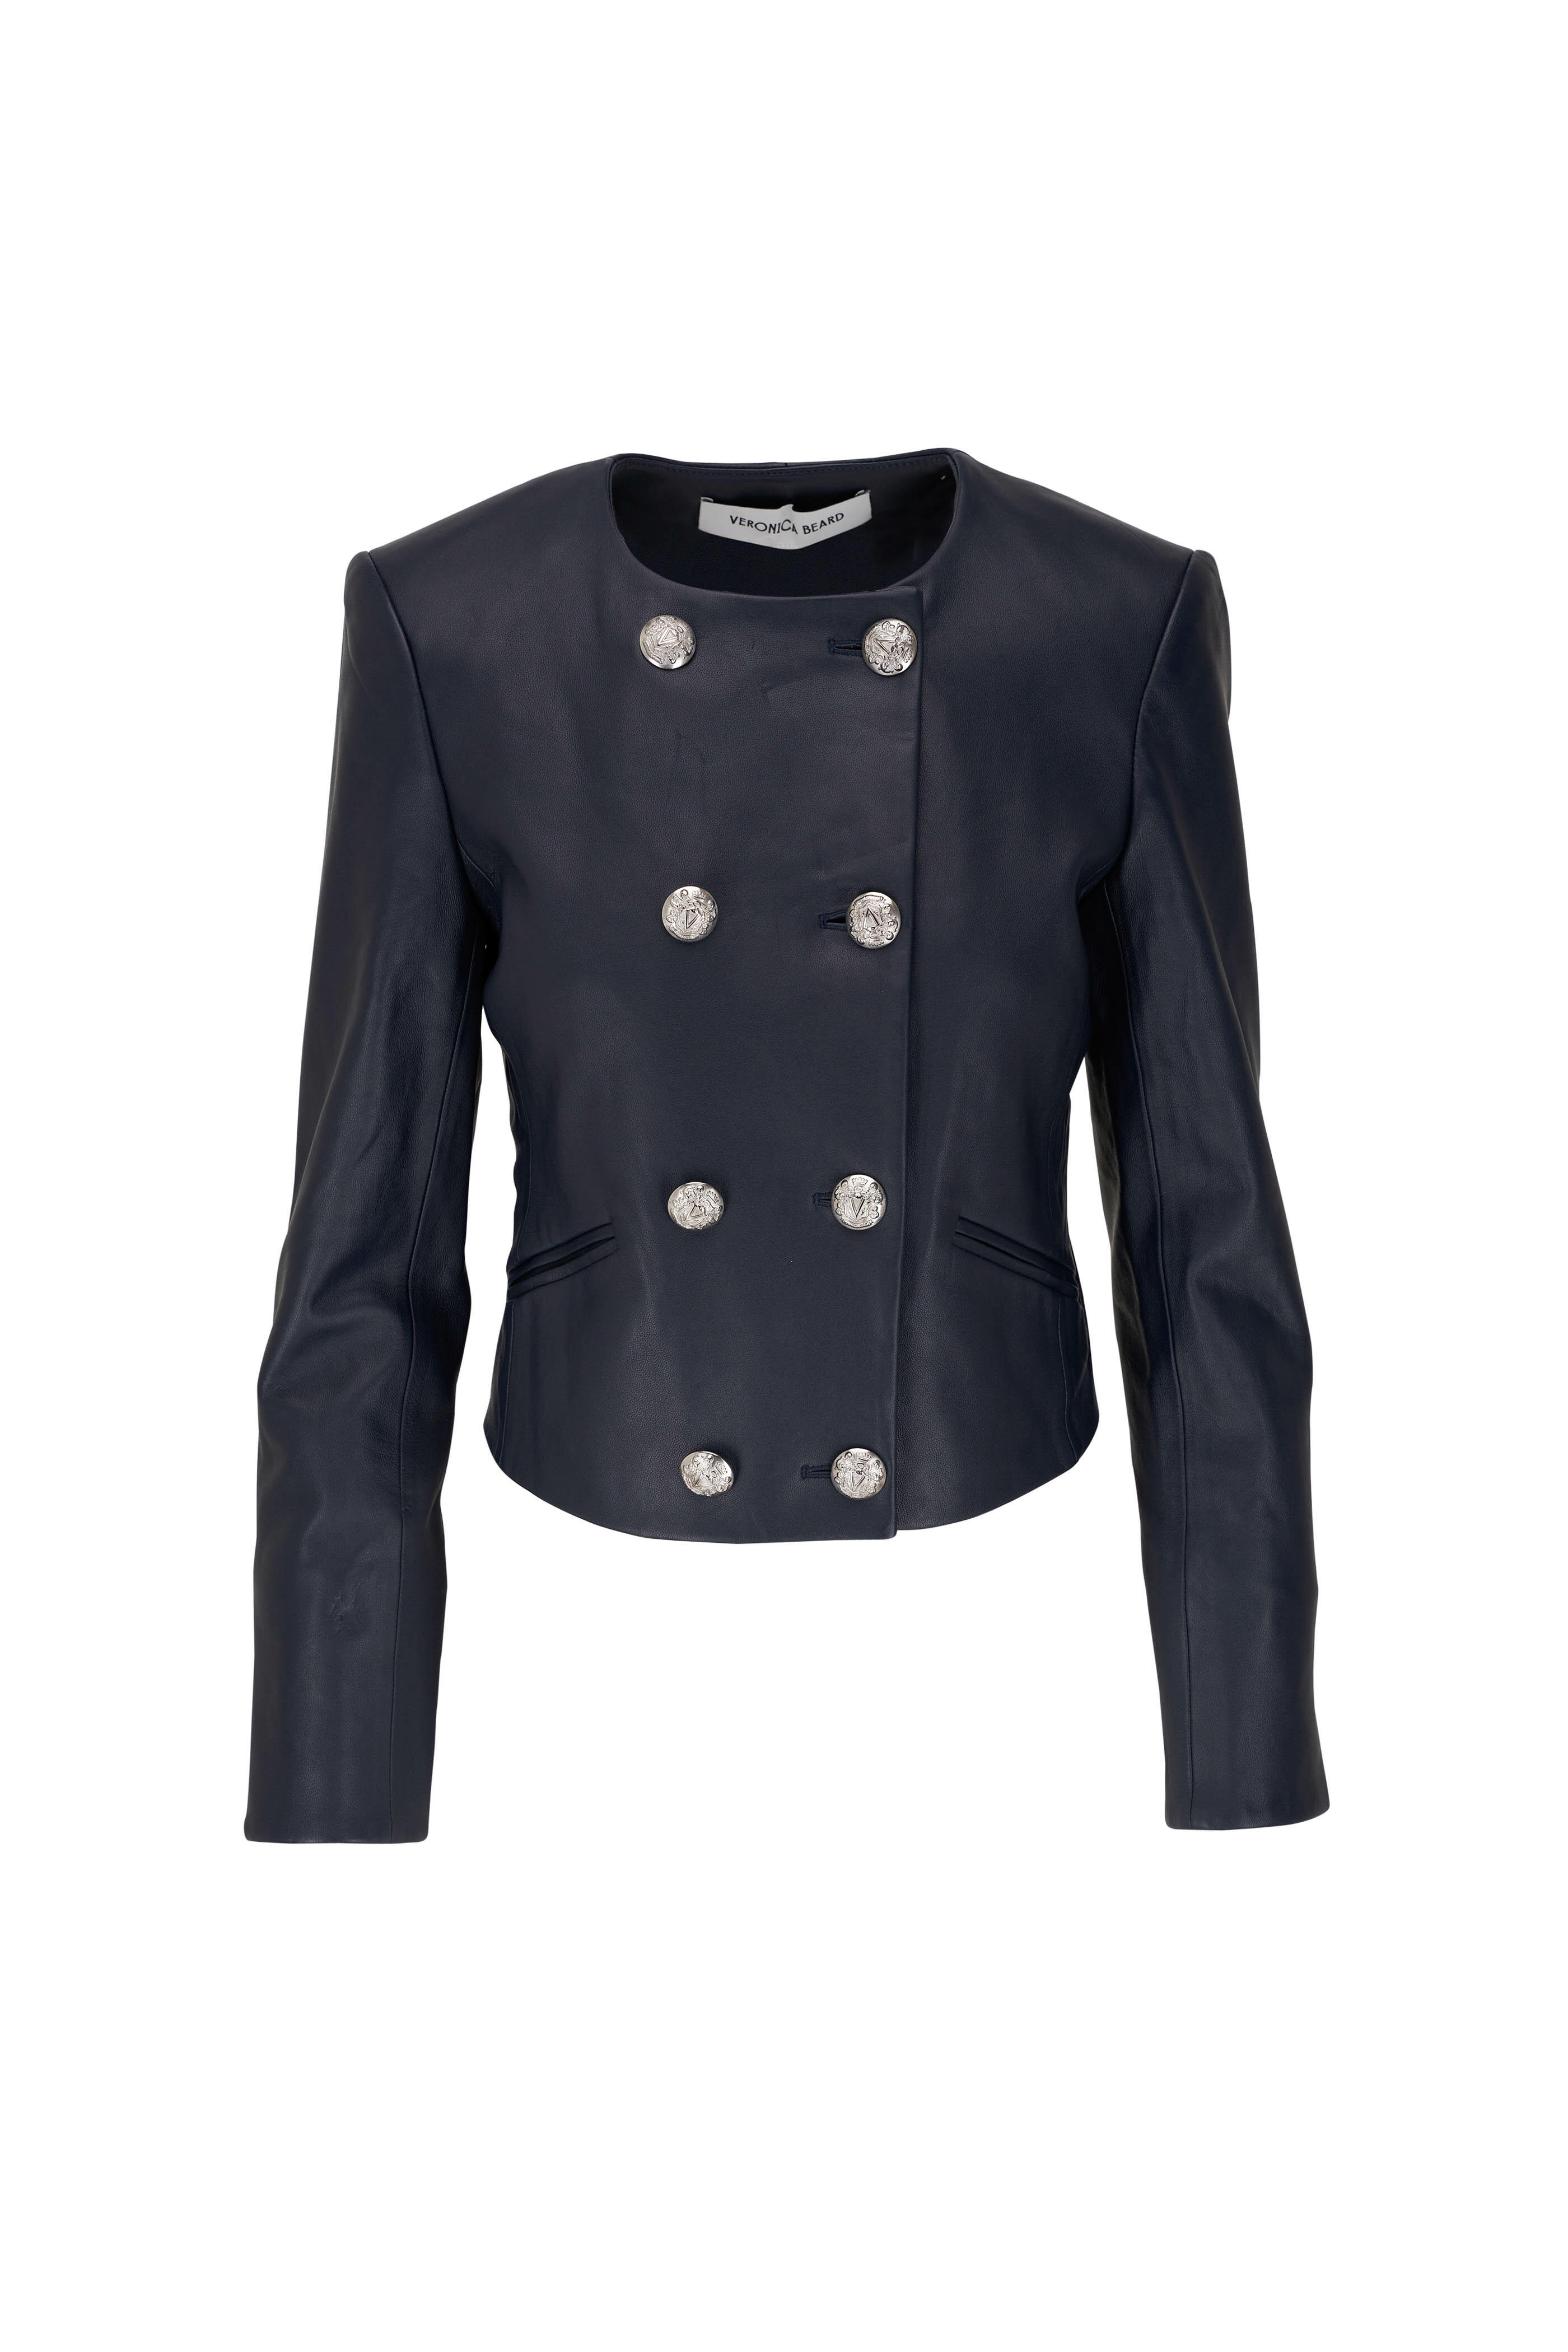 Veronica Beard - Winslow Navy Leather Jacket | Mitchell Stores